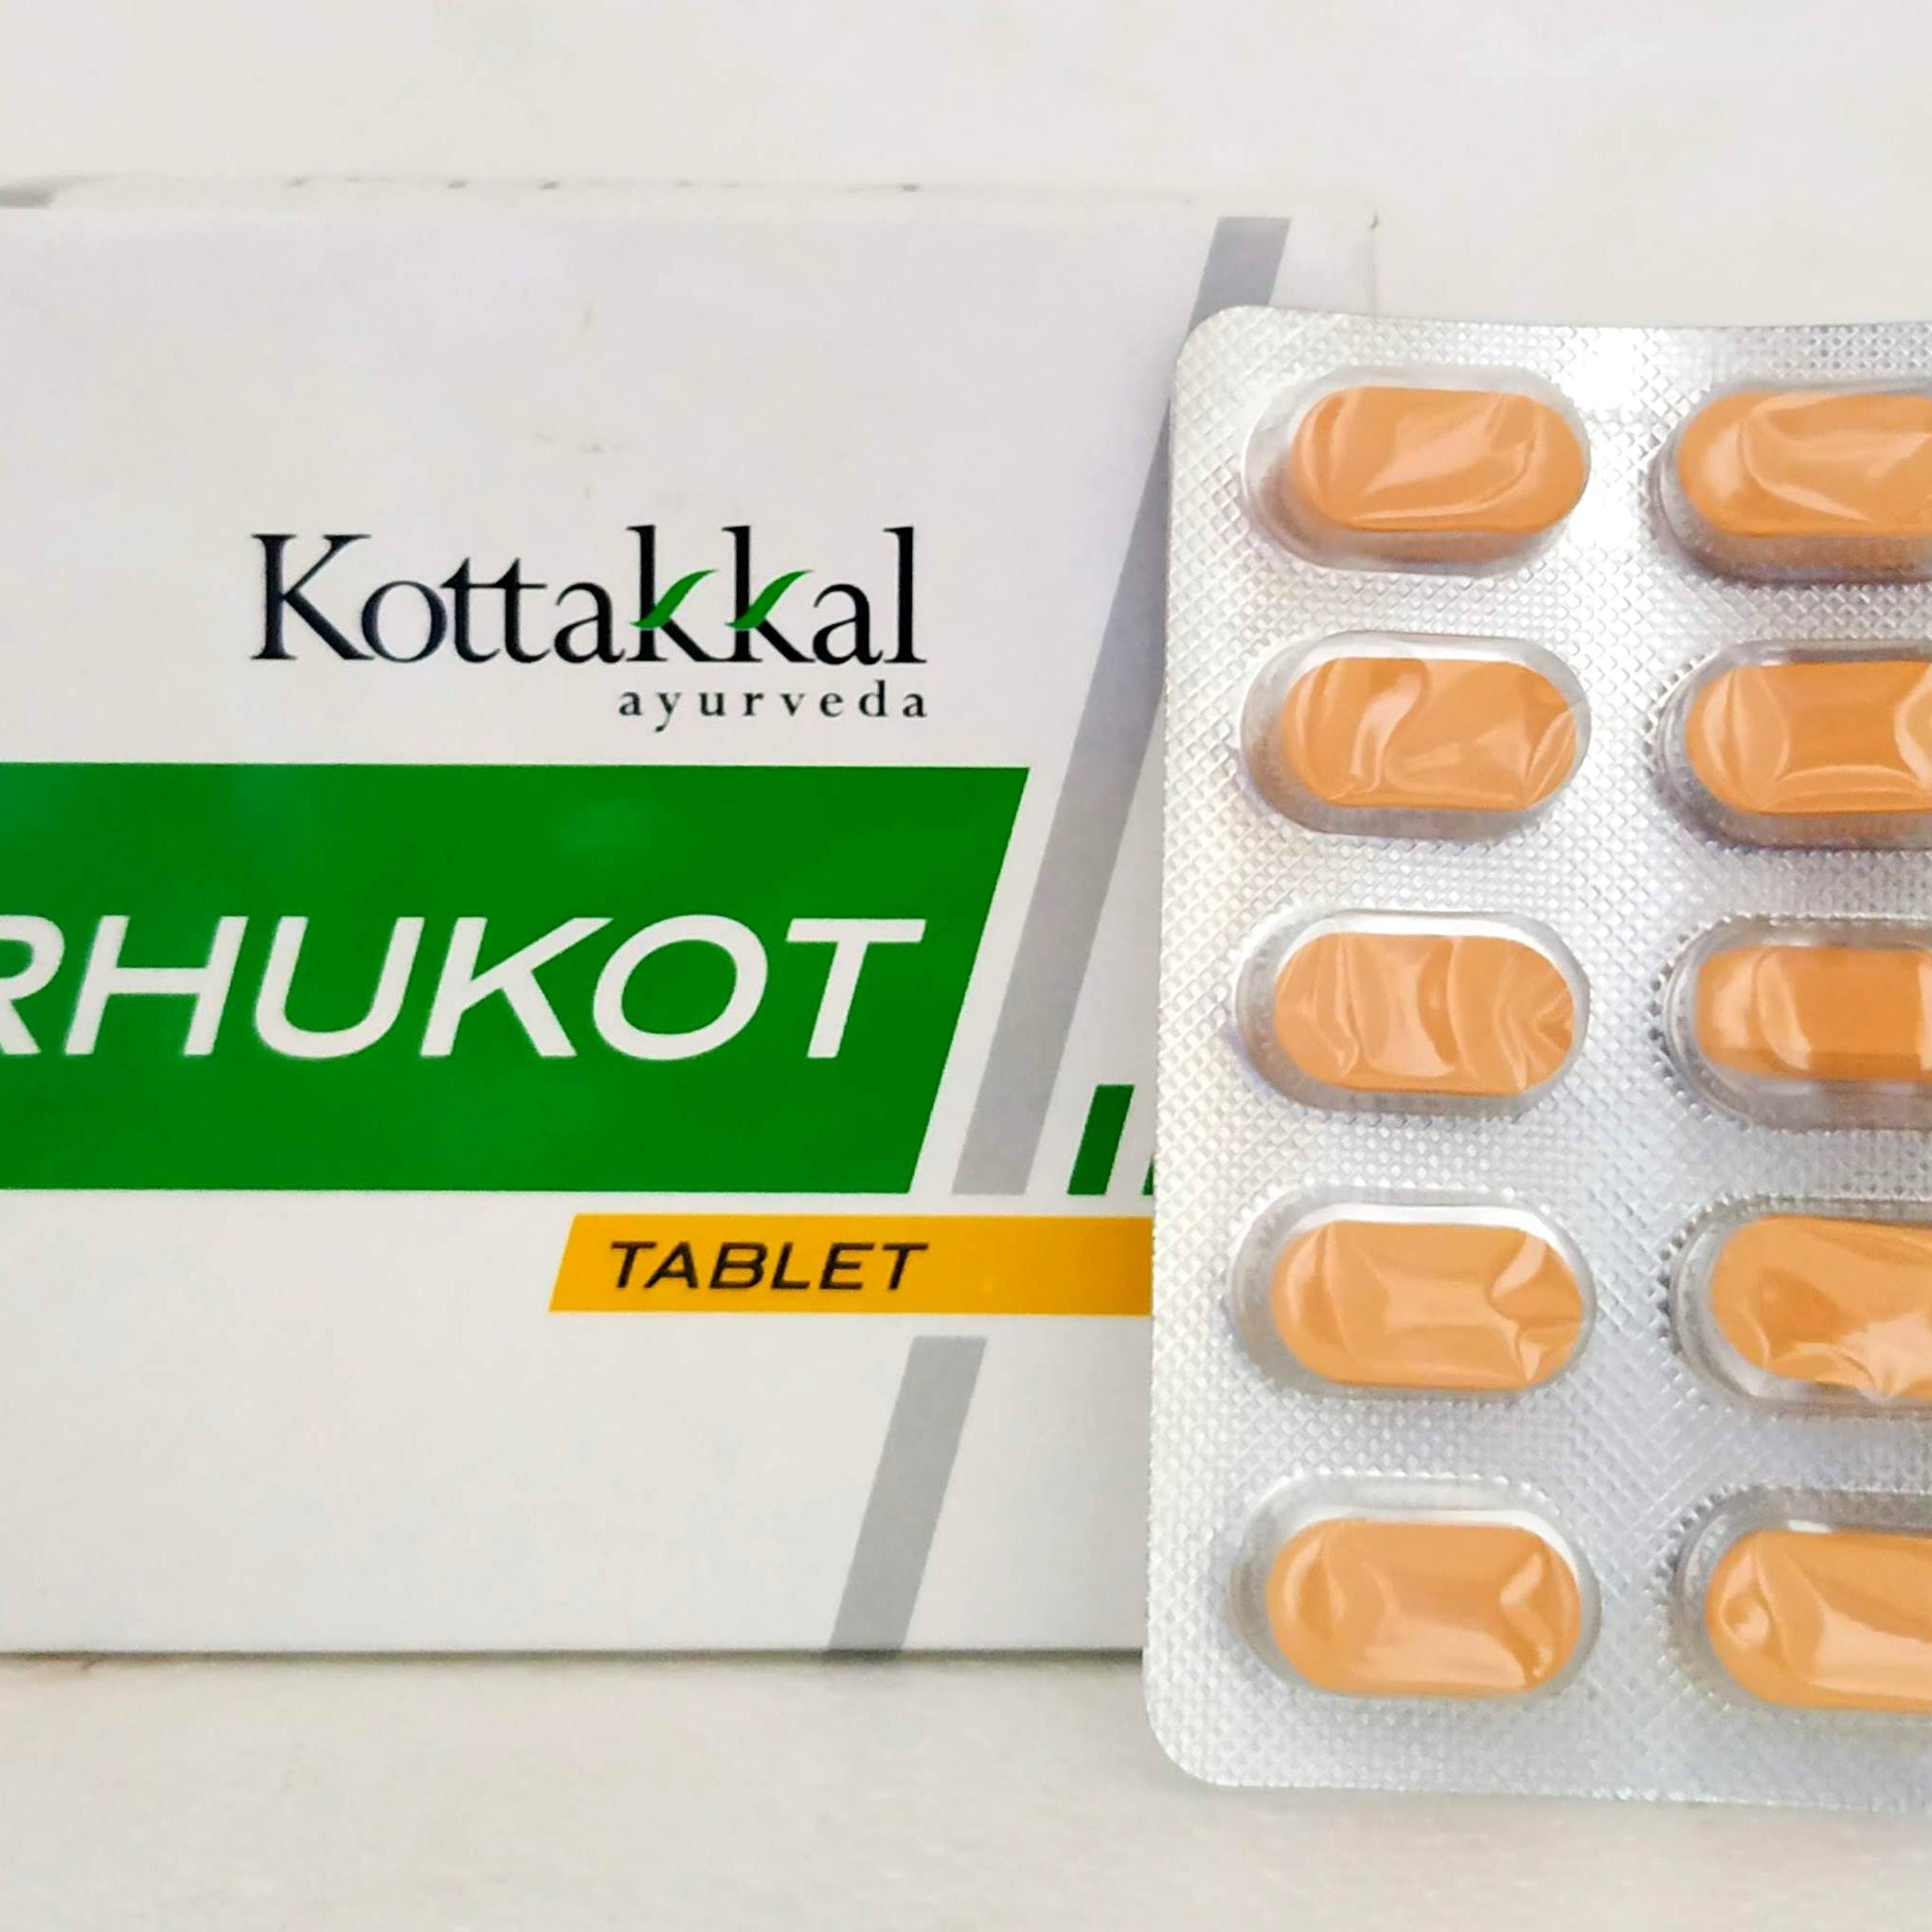 Shop Rhukot Tablets - 10Tablets at price 51.50 from Kottakkal Online - Ayush Care